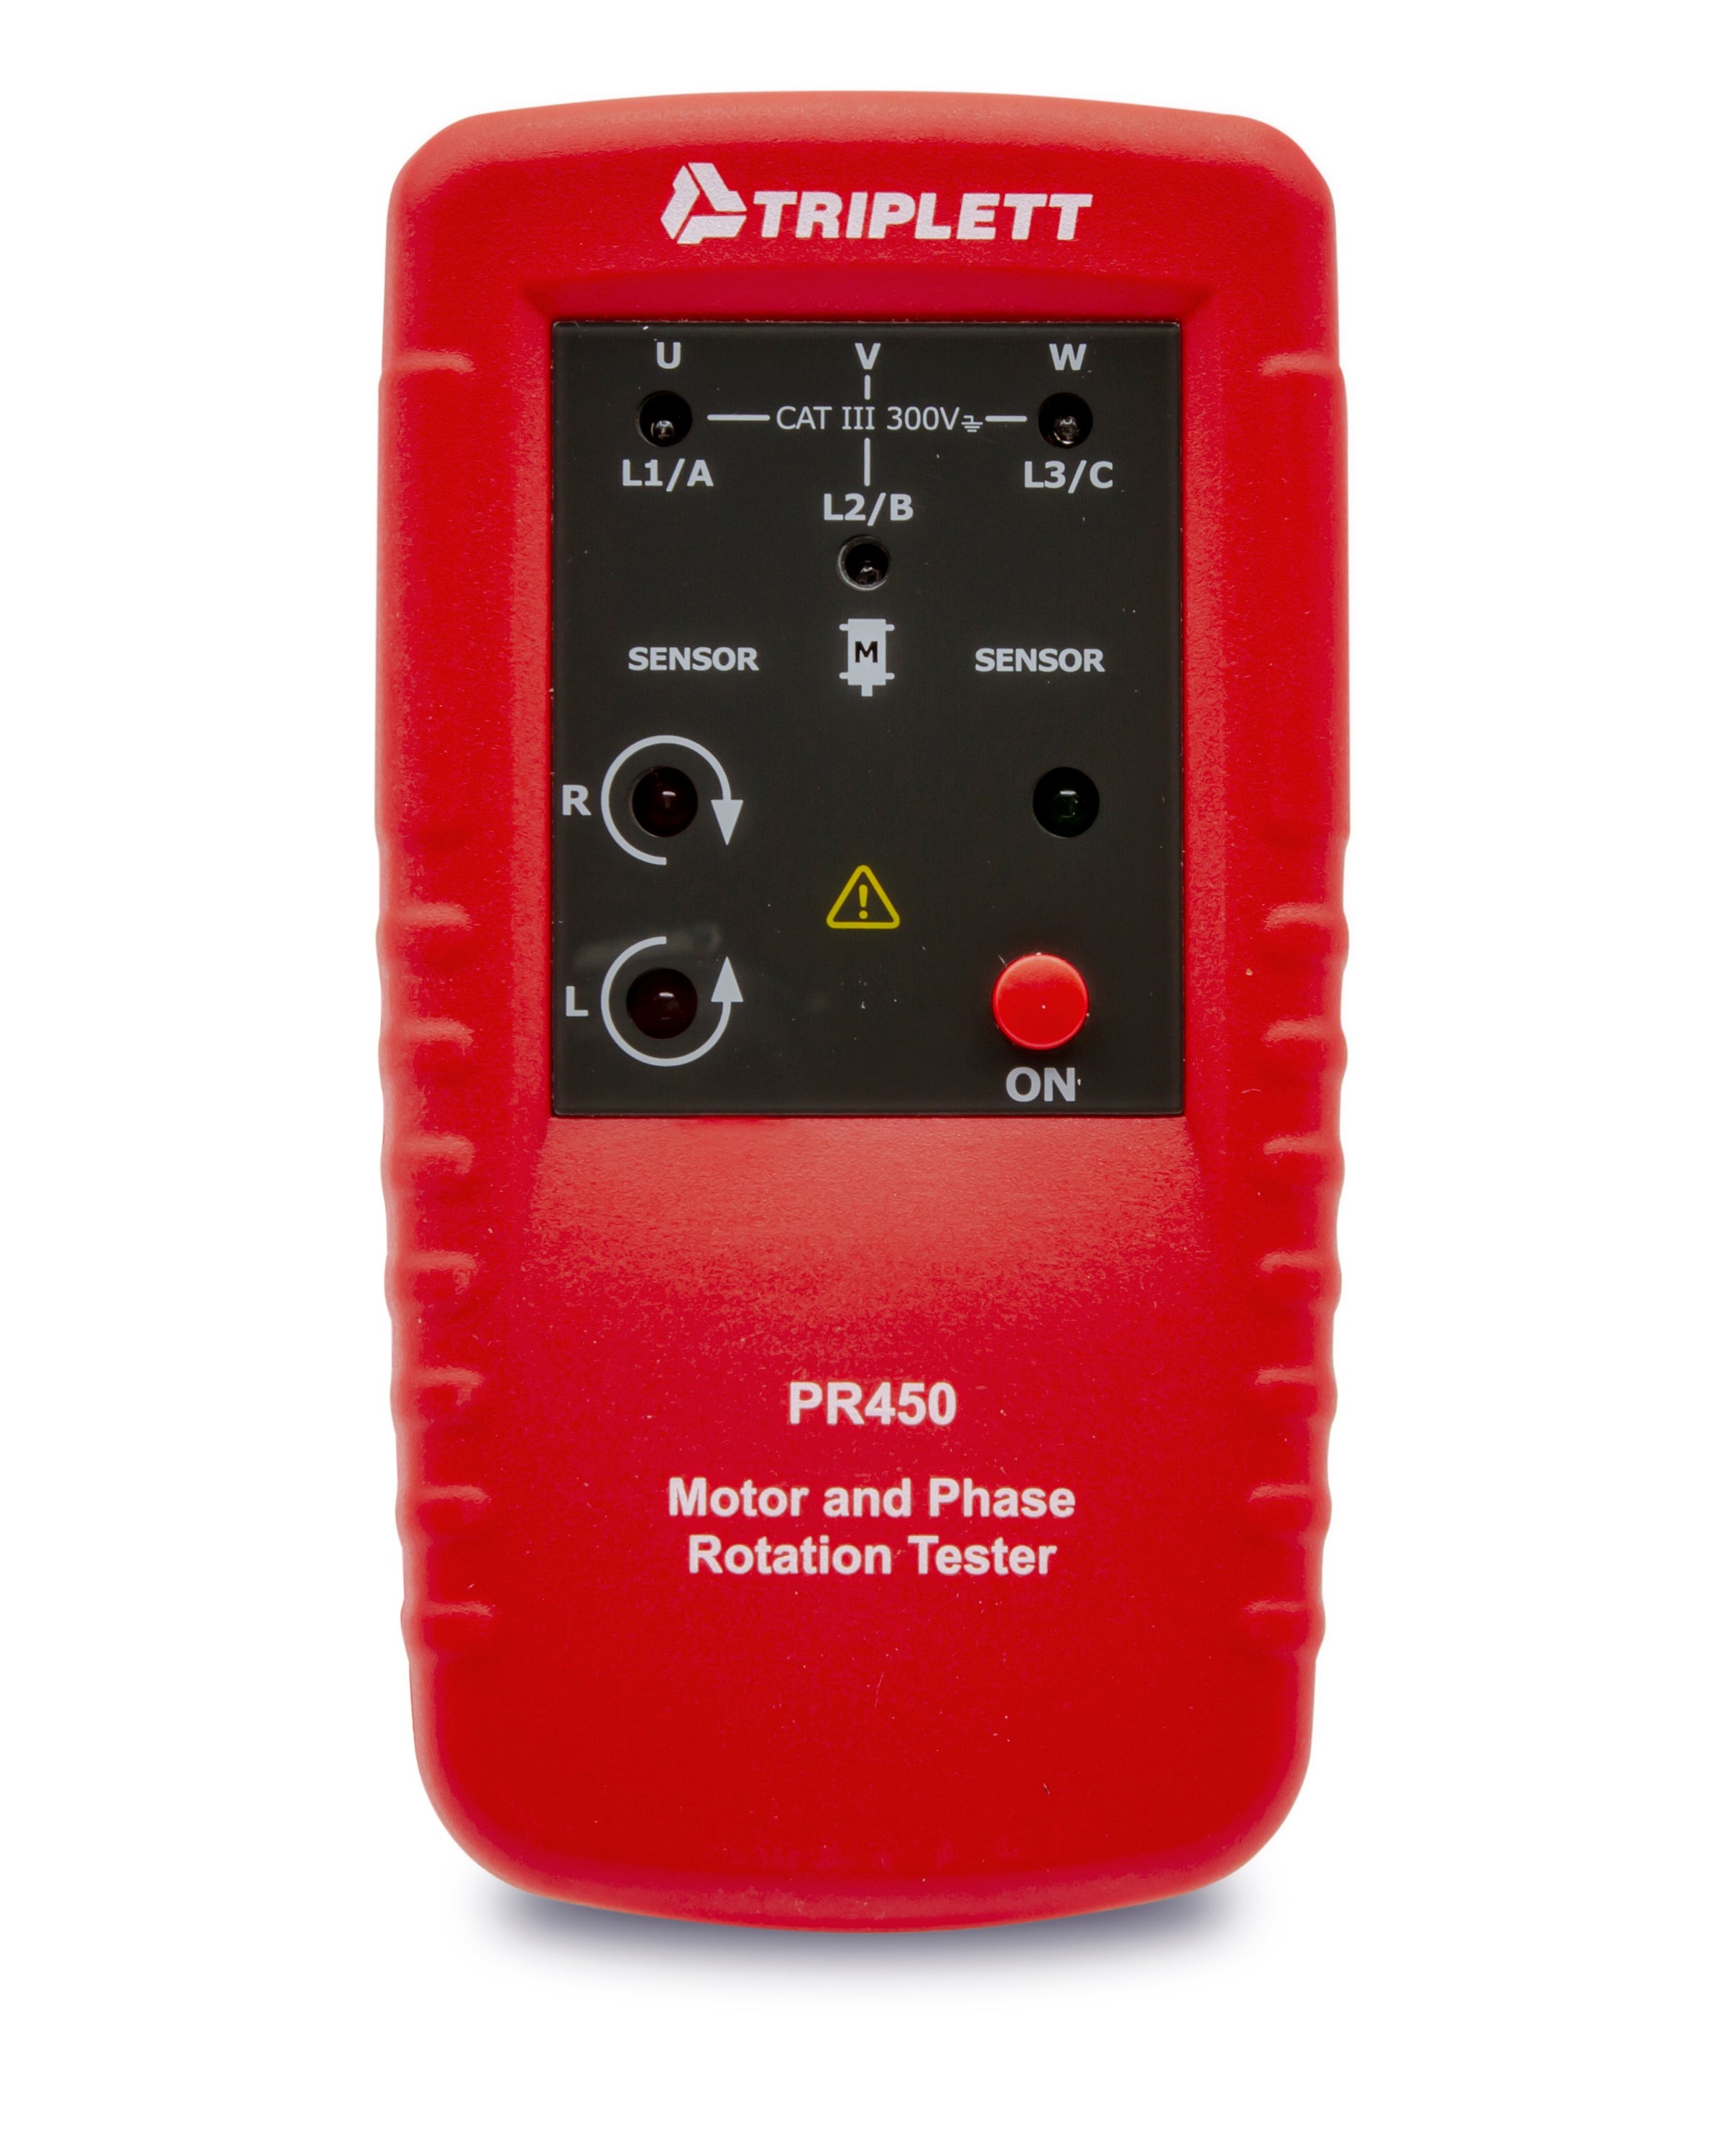 Motor and Phase Rotation Tester : Determines Correct Phase Wiring